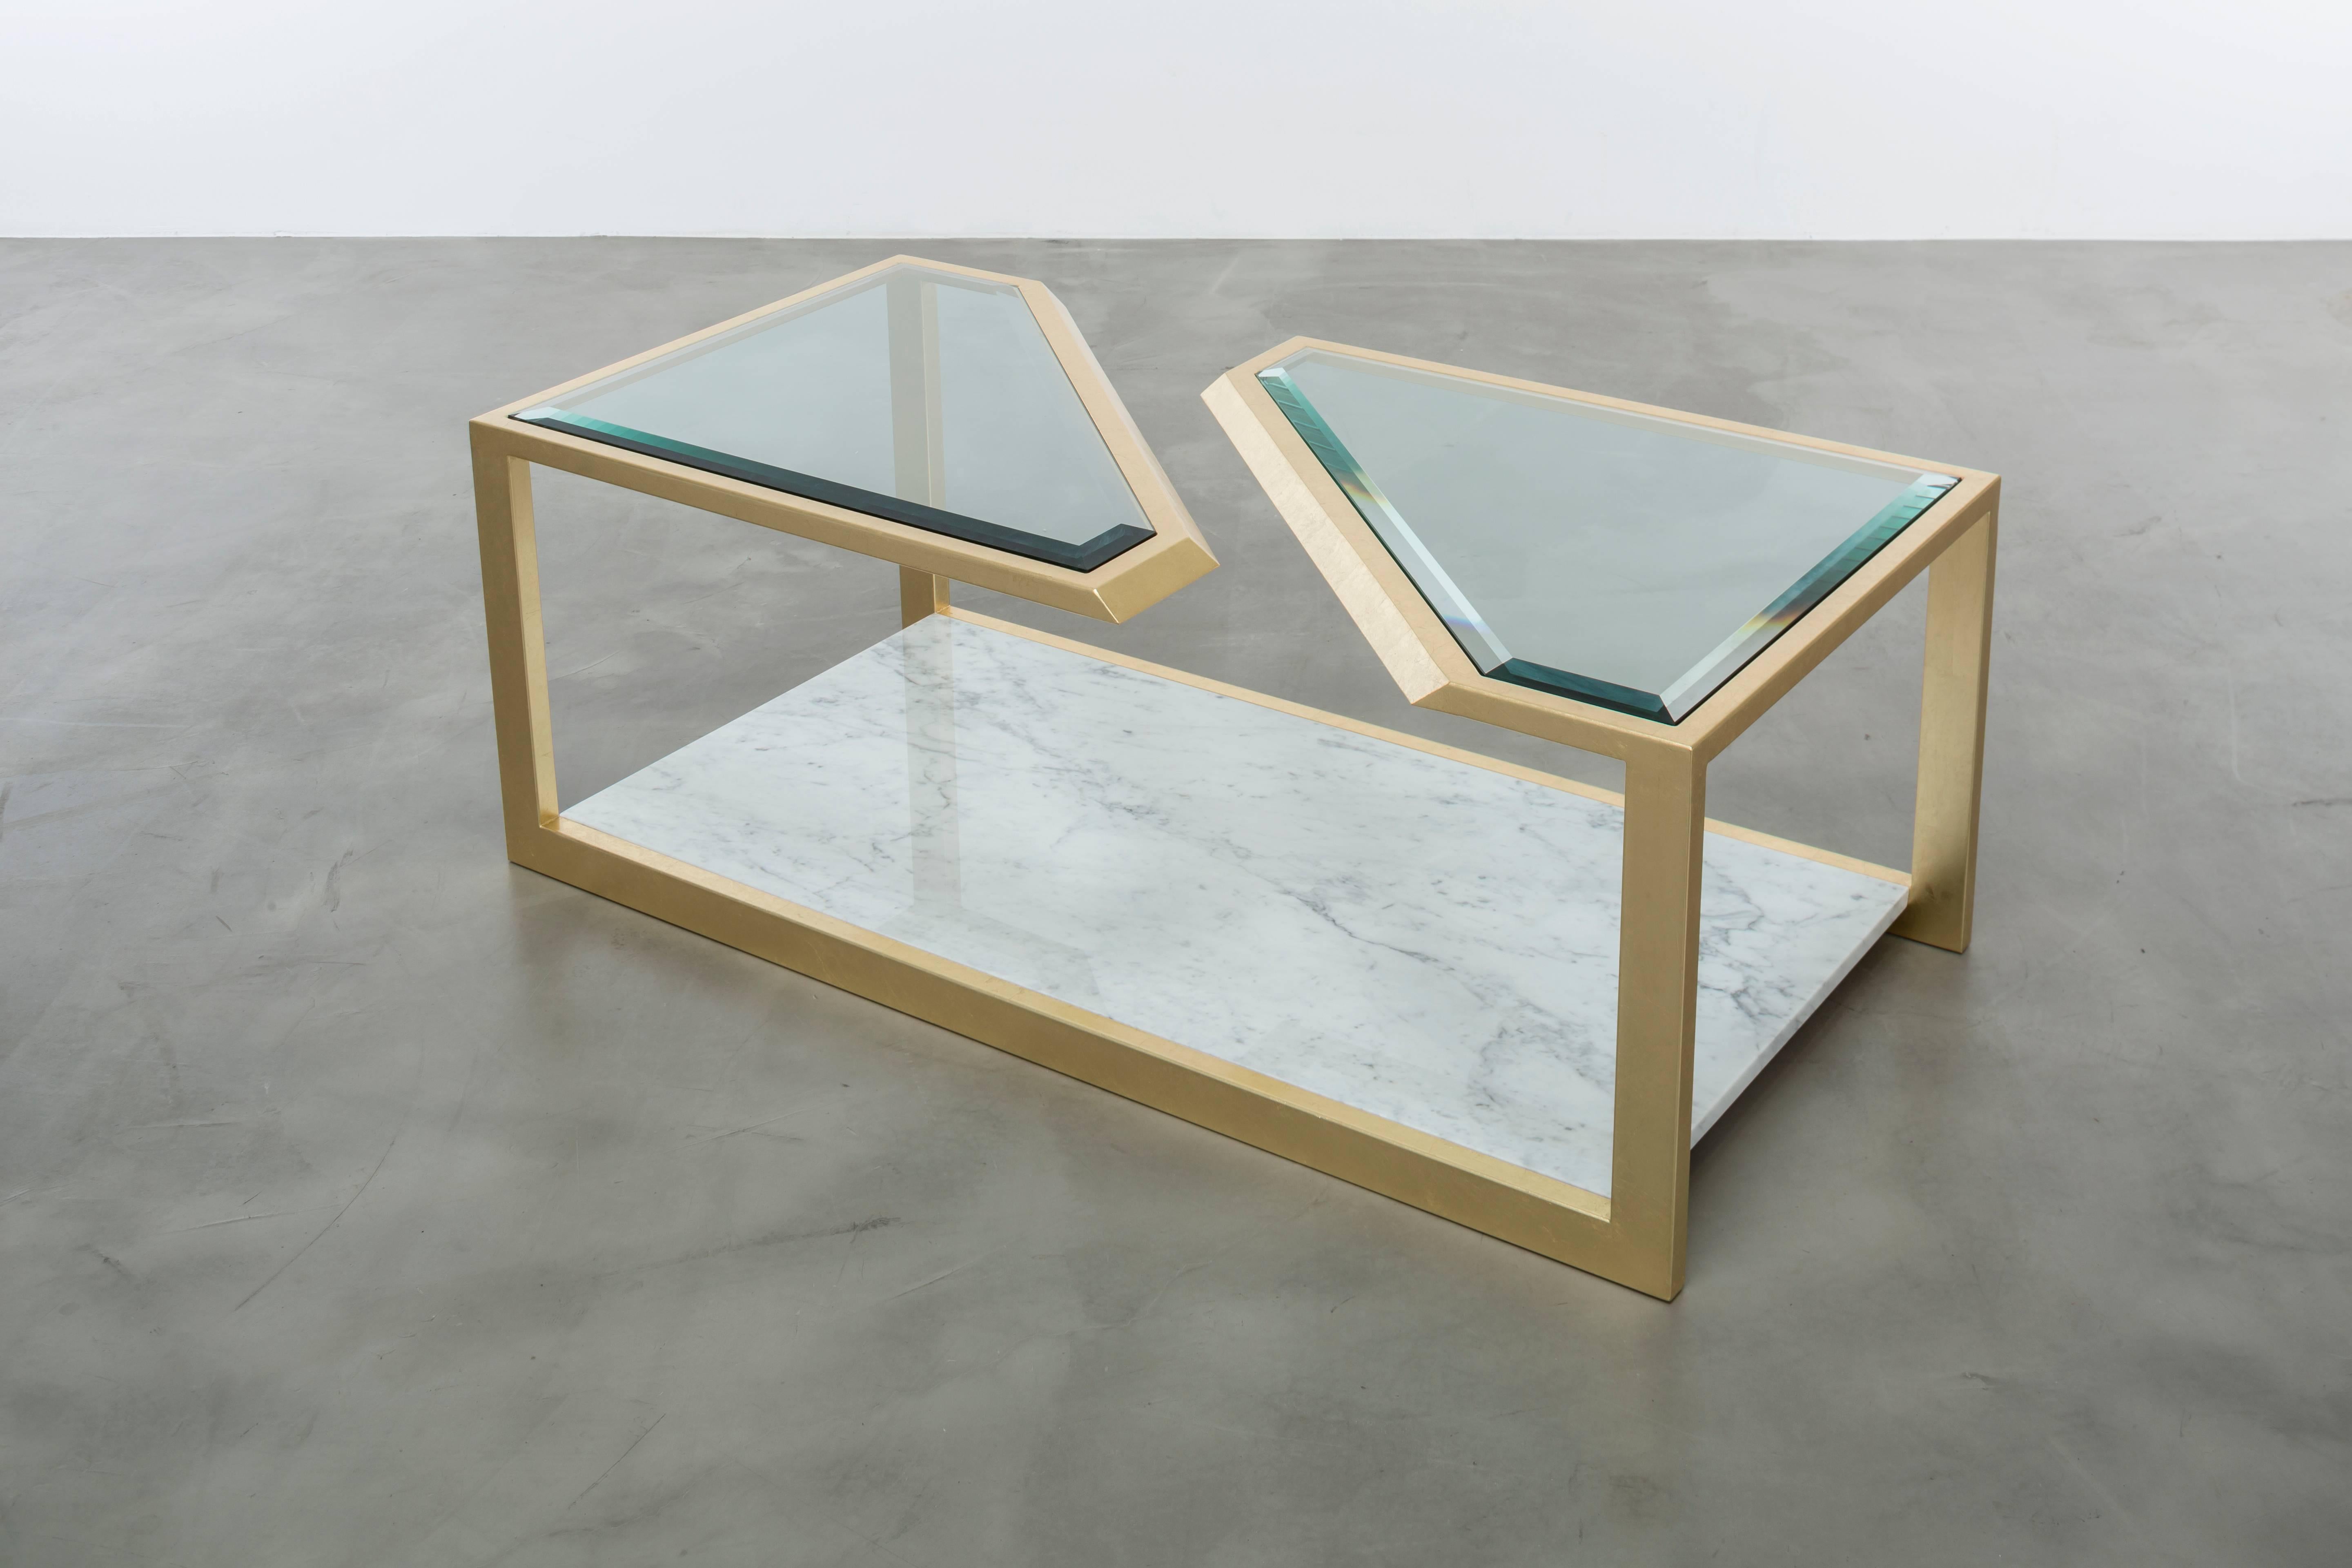 PIERRE COFFEE TABLE - Modern Carrara Marble with Gold Leaf and Beveled Glass

The Pierre coffee table is a stunning and modern fractured gold leaf cocktail table made of gold leaf over iron with a combination of Carrara marble and beveled edge